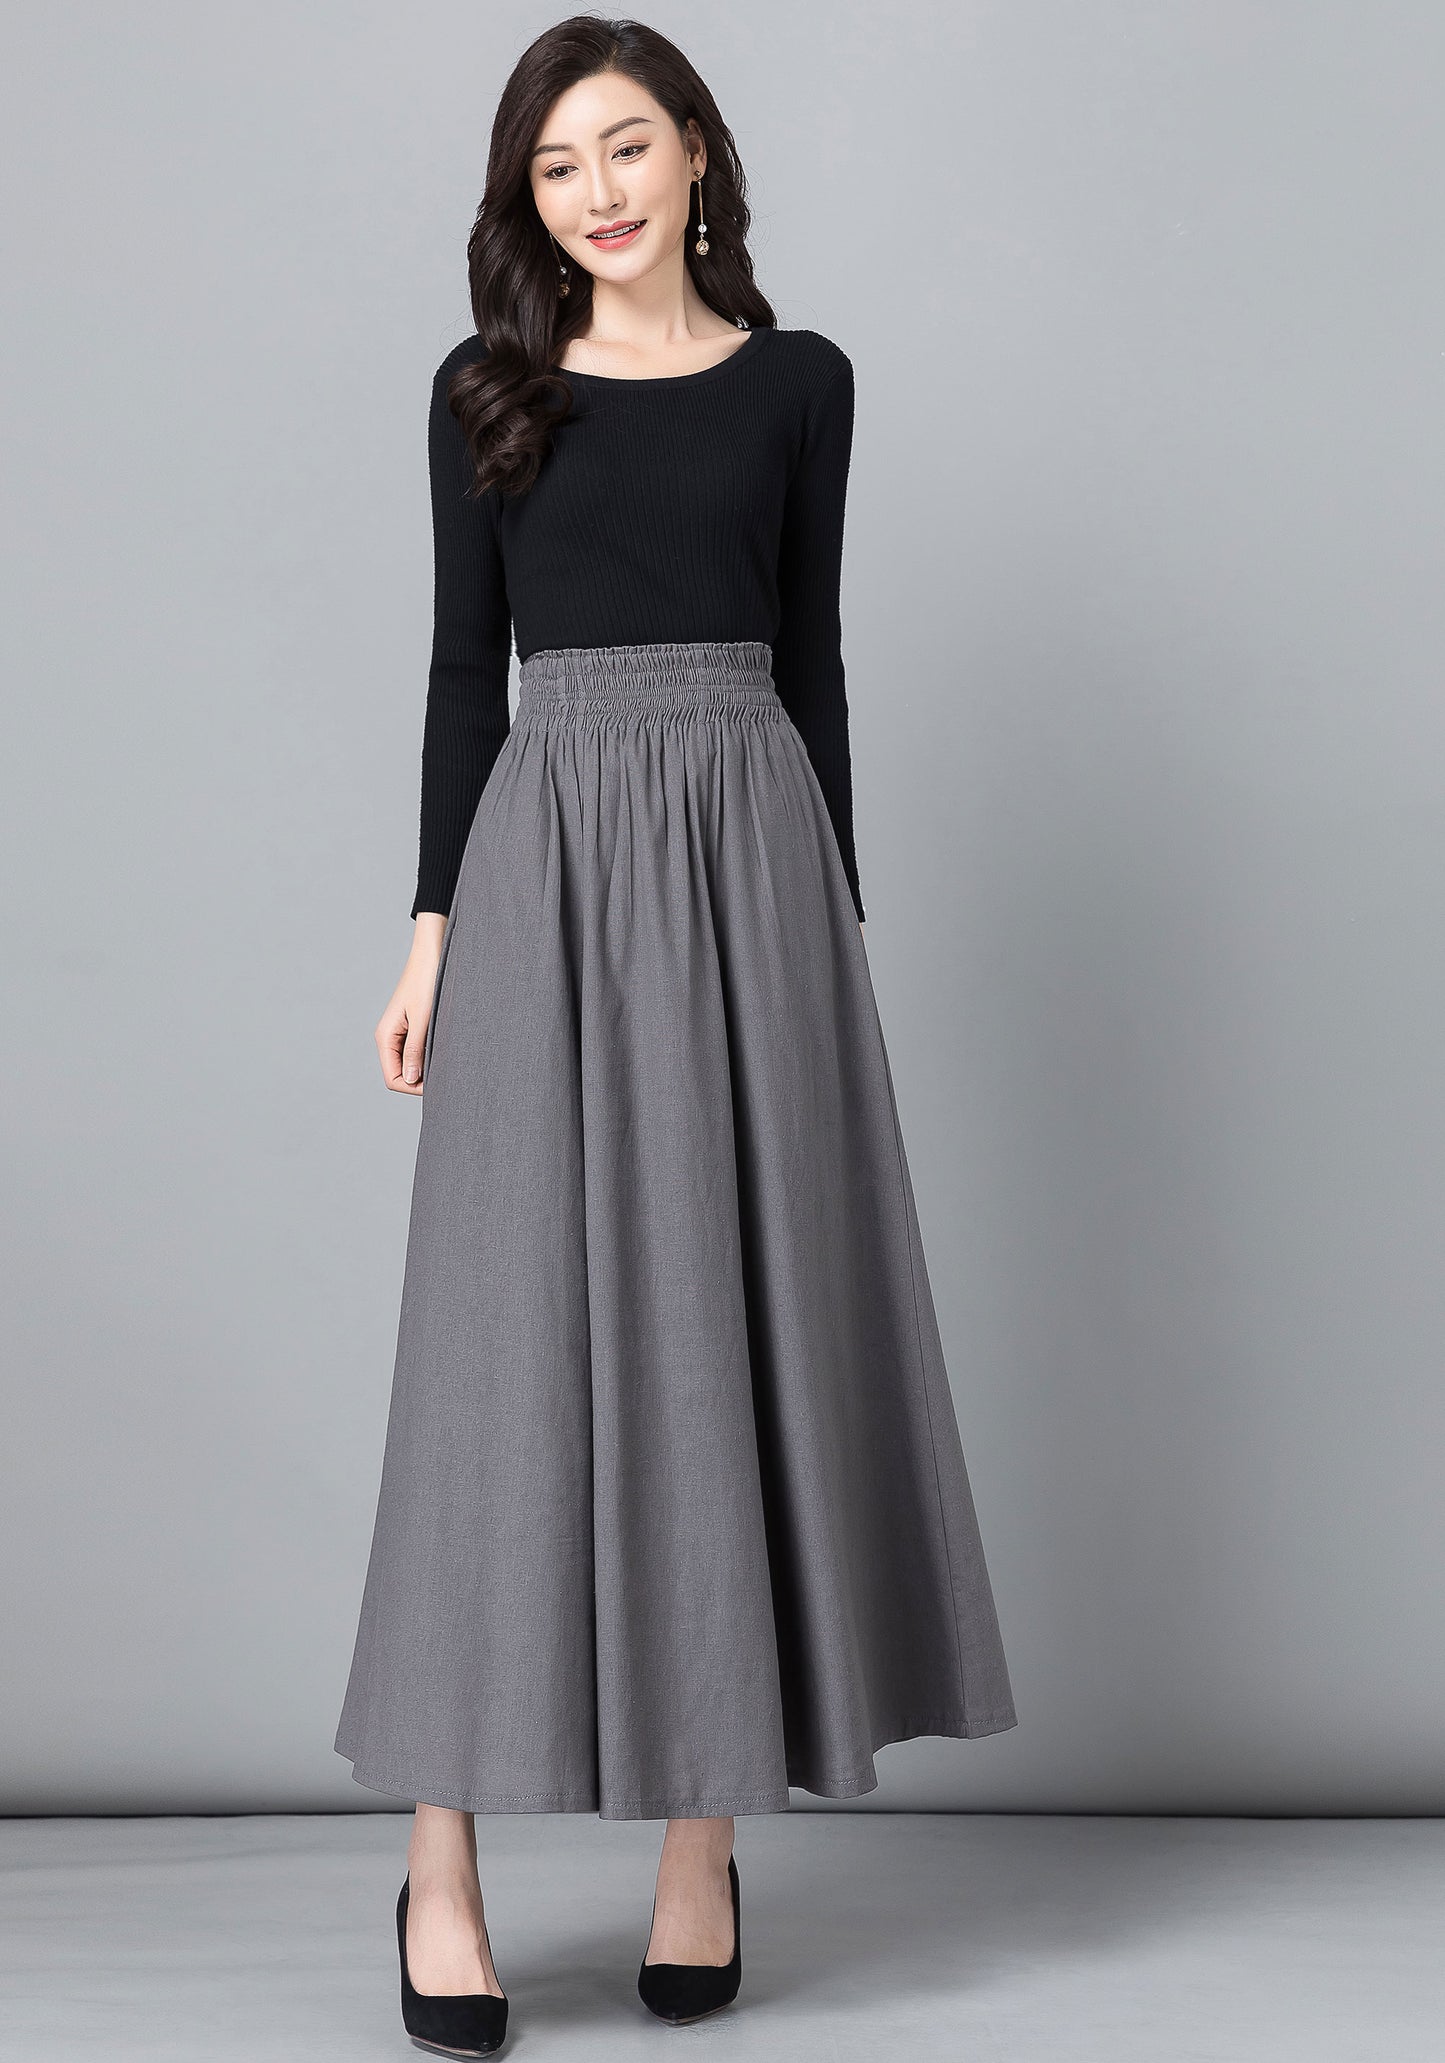 Gray High waist Long pleated Swing Skirt with pockets 2538#